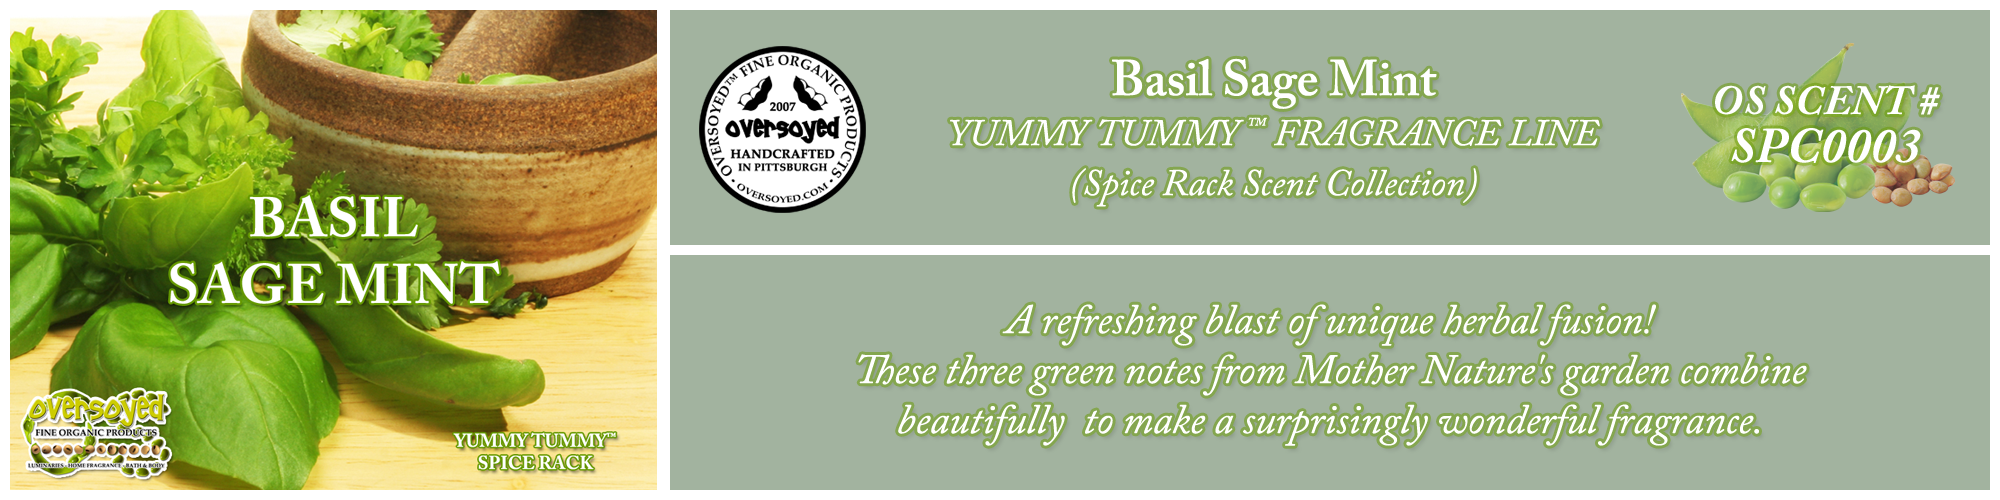 Basil Sage Mint Handcrafted Products Collection